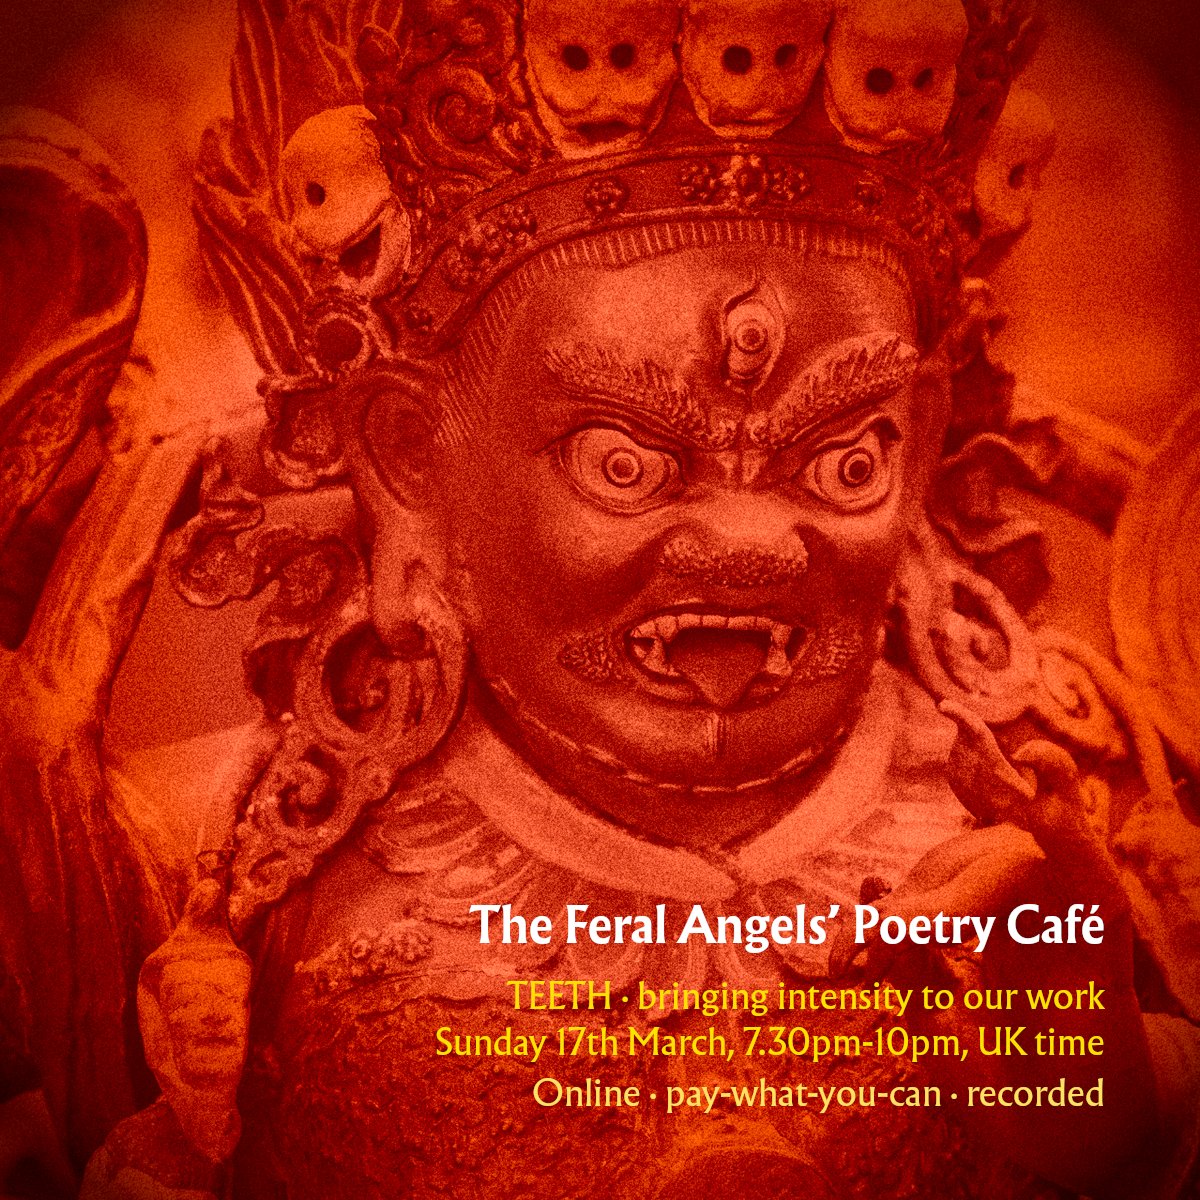 TEETH The next #FeralAngelsPoetryCafe. SUNDAY 17TH MARCH Intensity, hunger, ferocious boldness. What gives our work teeth? The blood and guts and ecstasy and grit between the words... It's like duende, but less holy. Perhaps. Come and explore with me. tomhirons.com/events/feral-a…